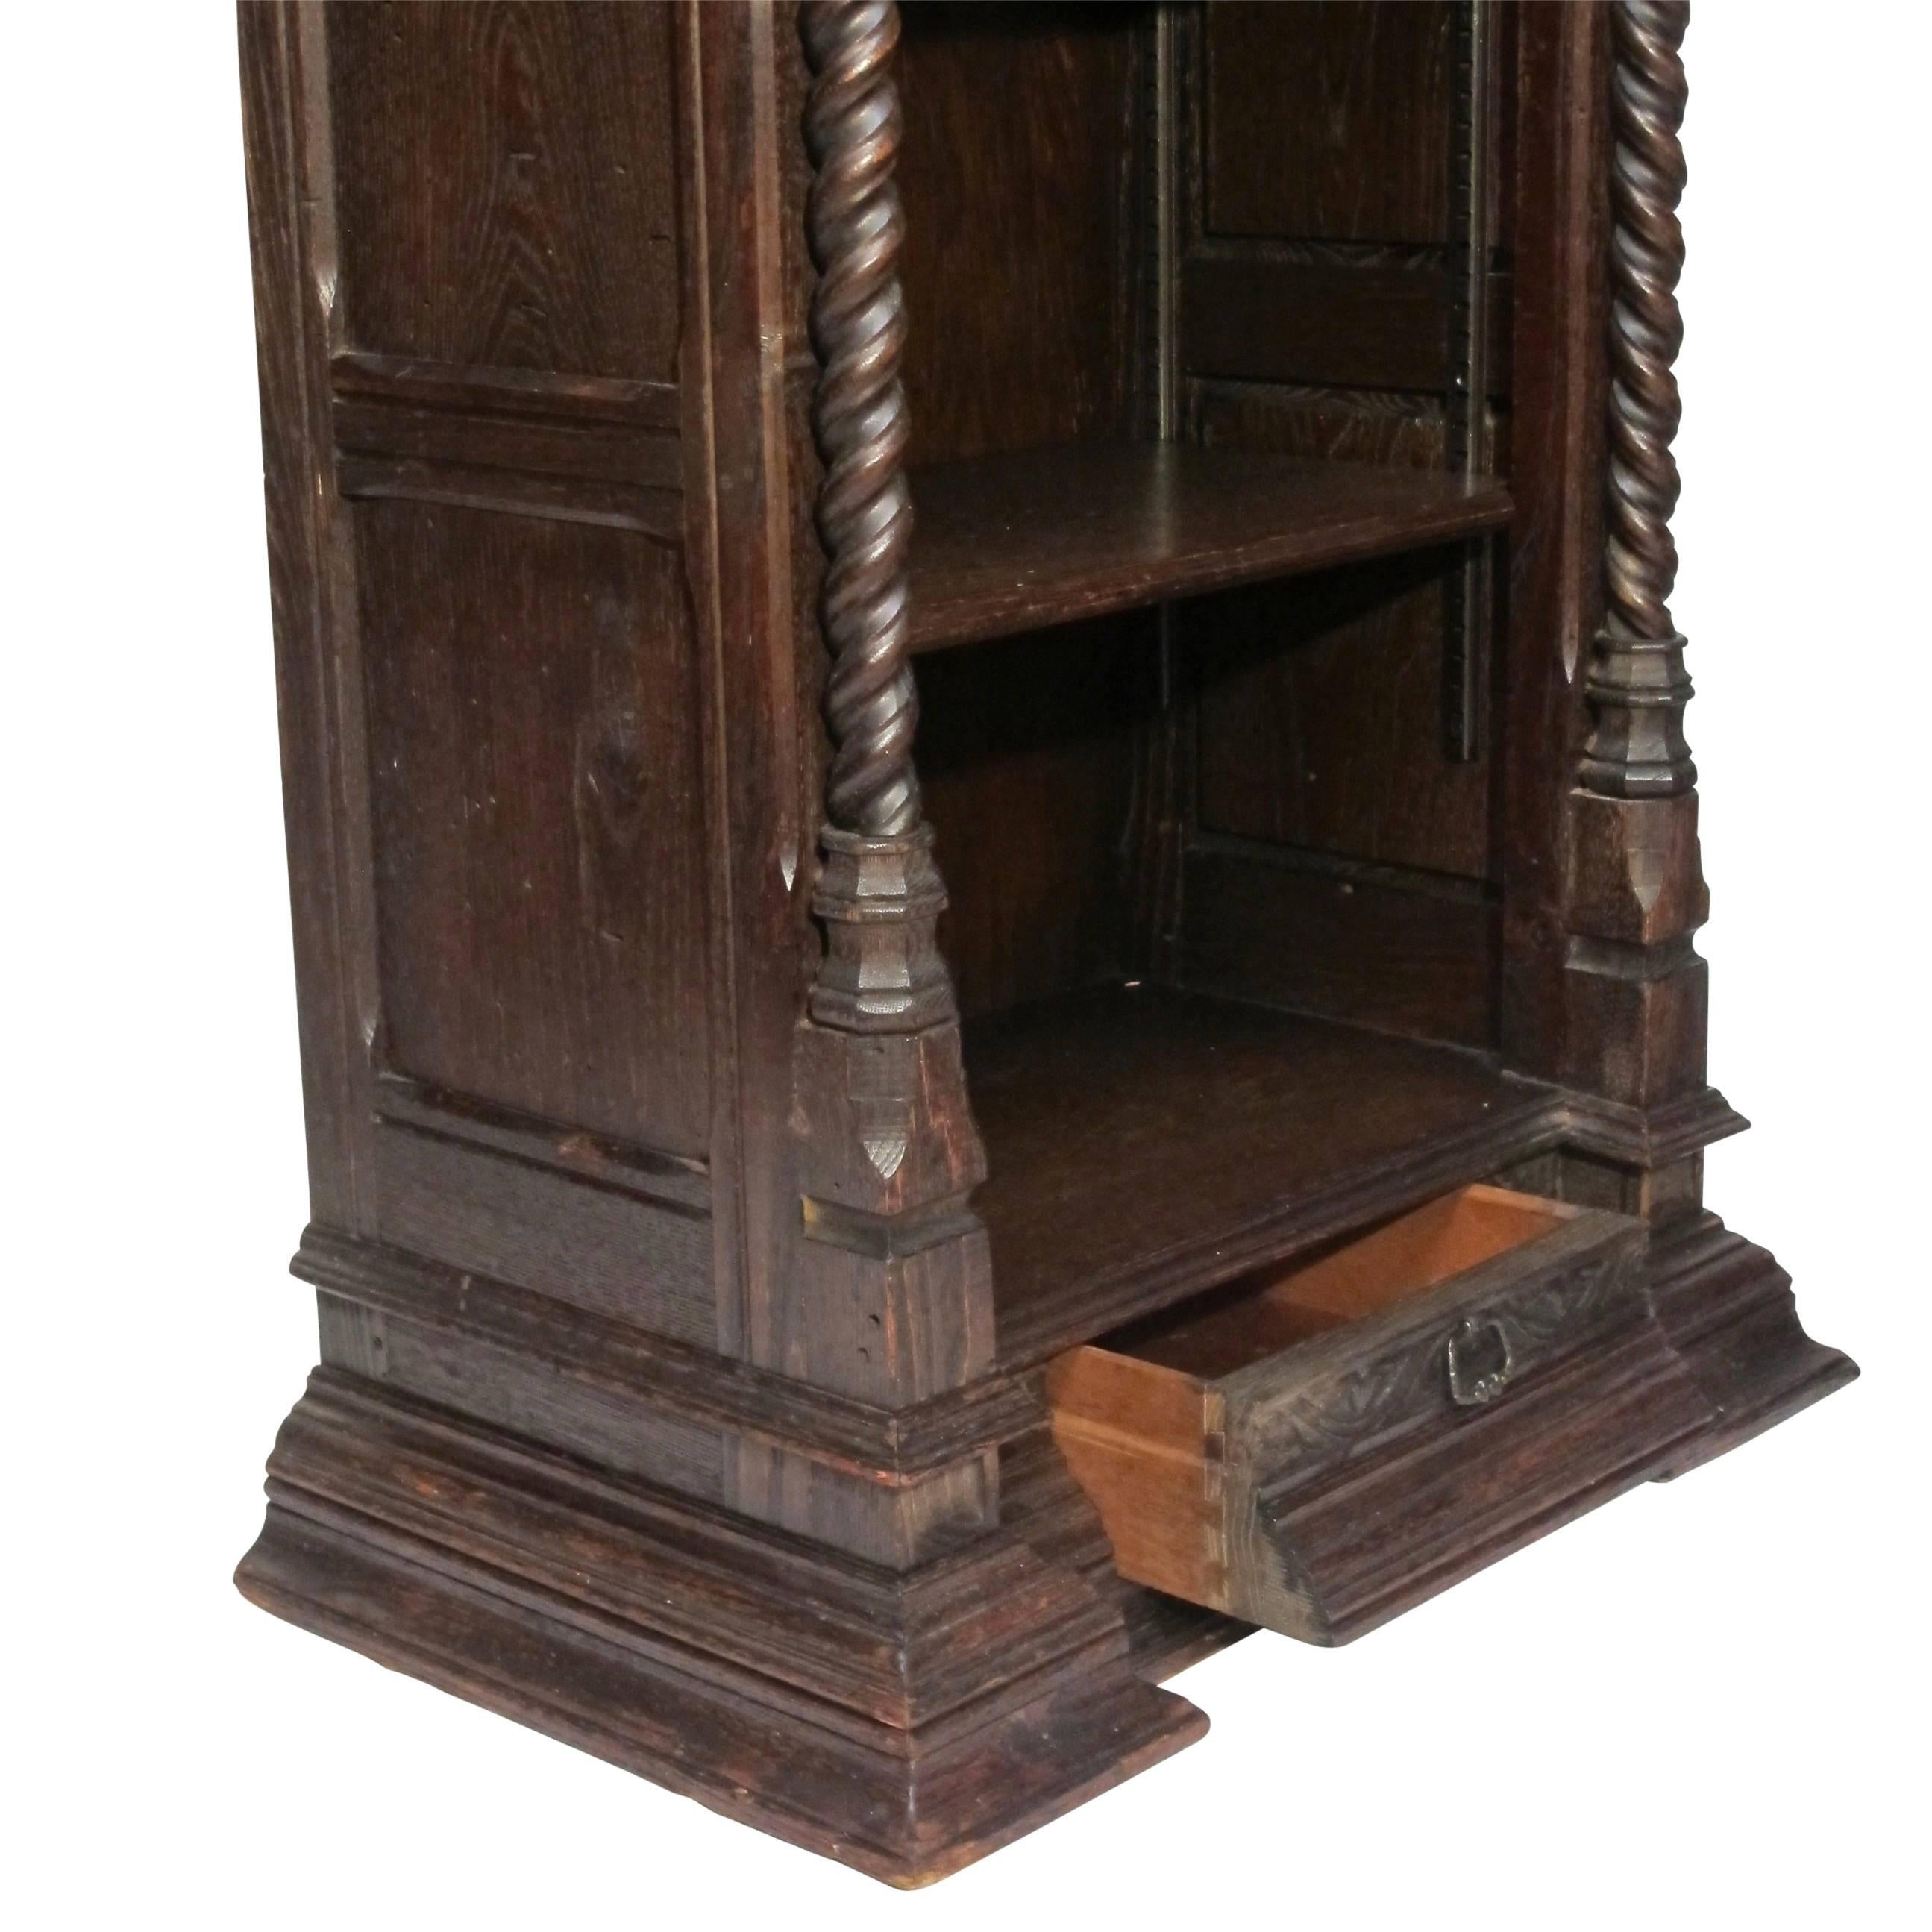 Carved Pair of Spanish Revival Oak Bookcases, American, circa 1920